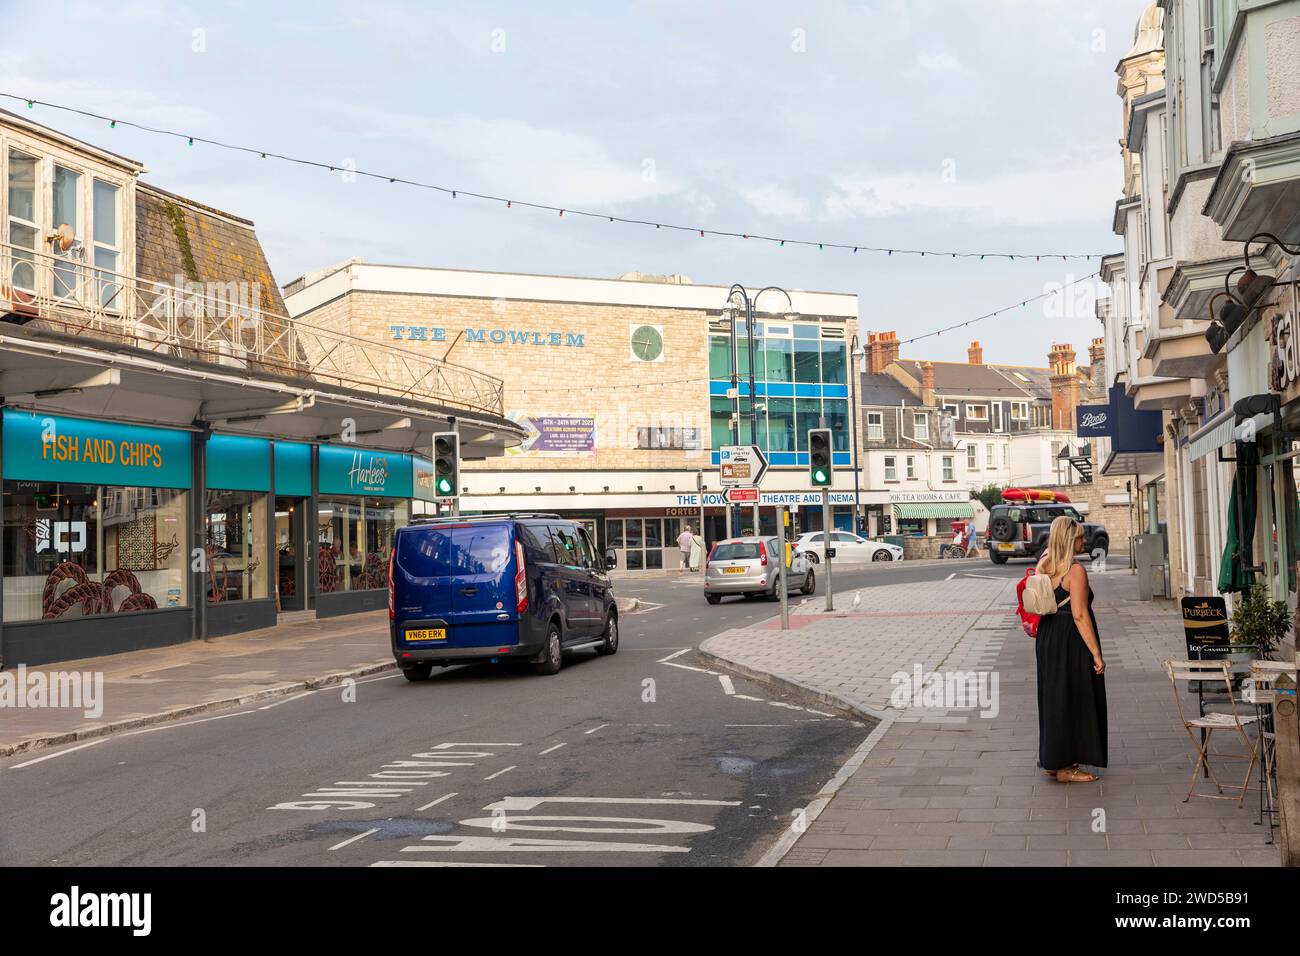 Swanage town centre with the Mowlem theatre and Harlees fish and chips shop,Dorset, England,UK,2023 Stock Photo